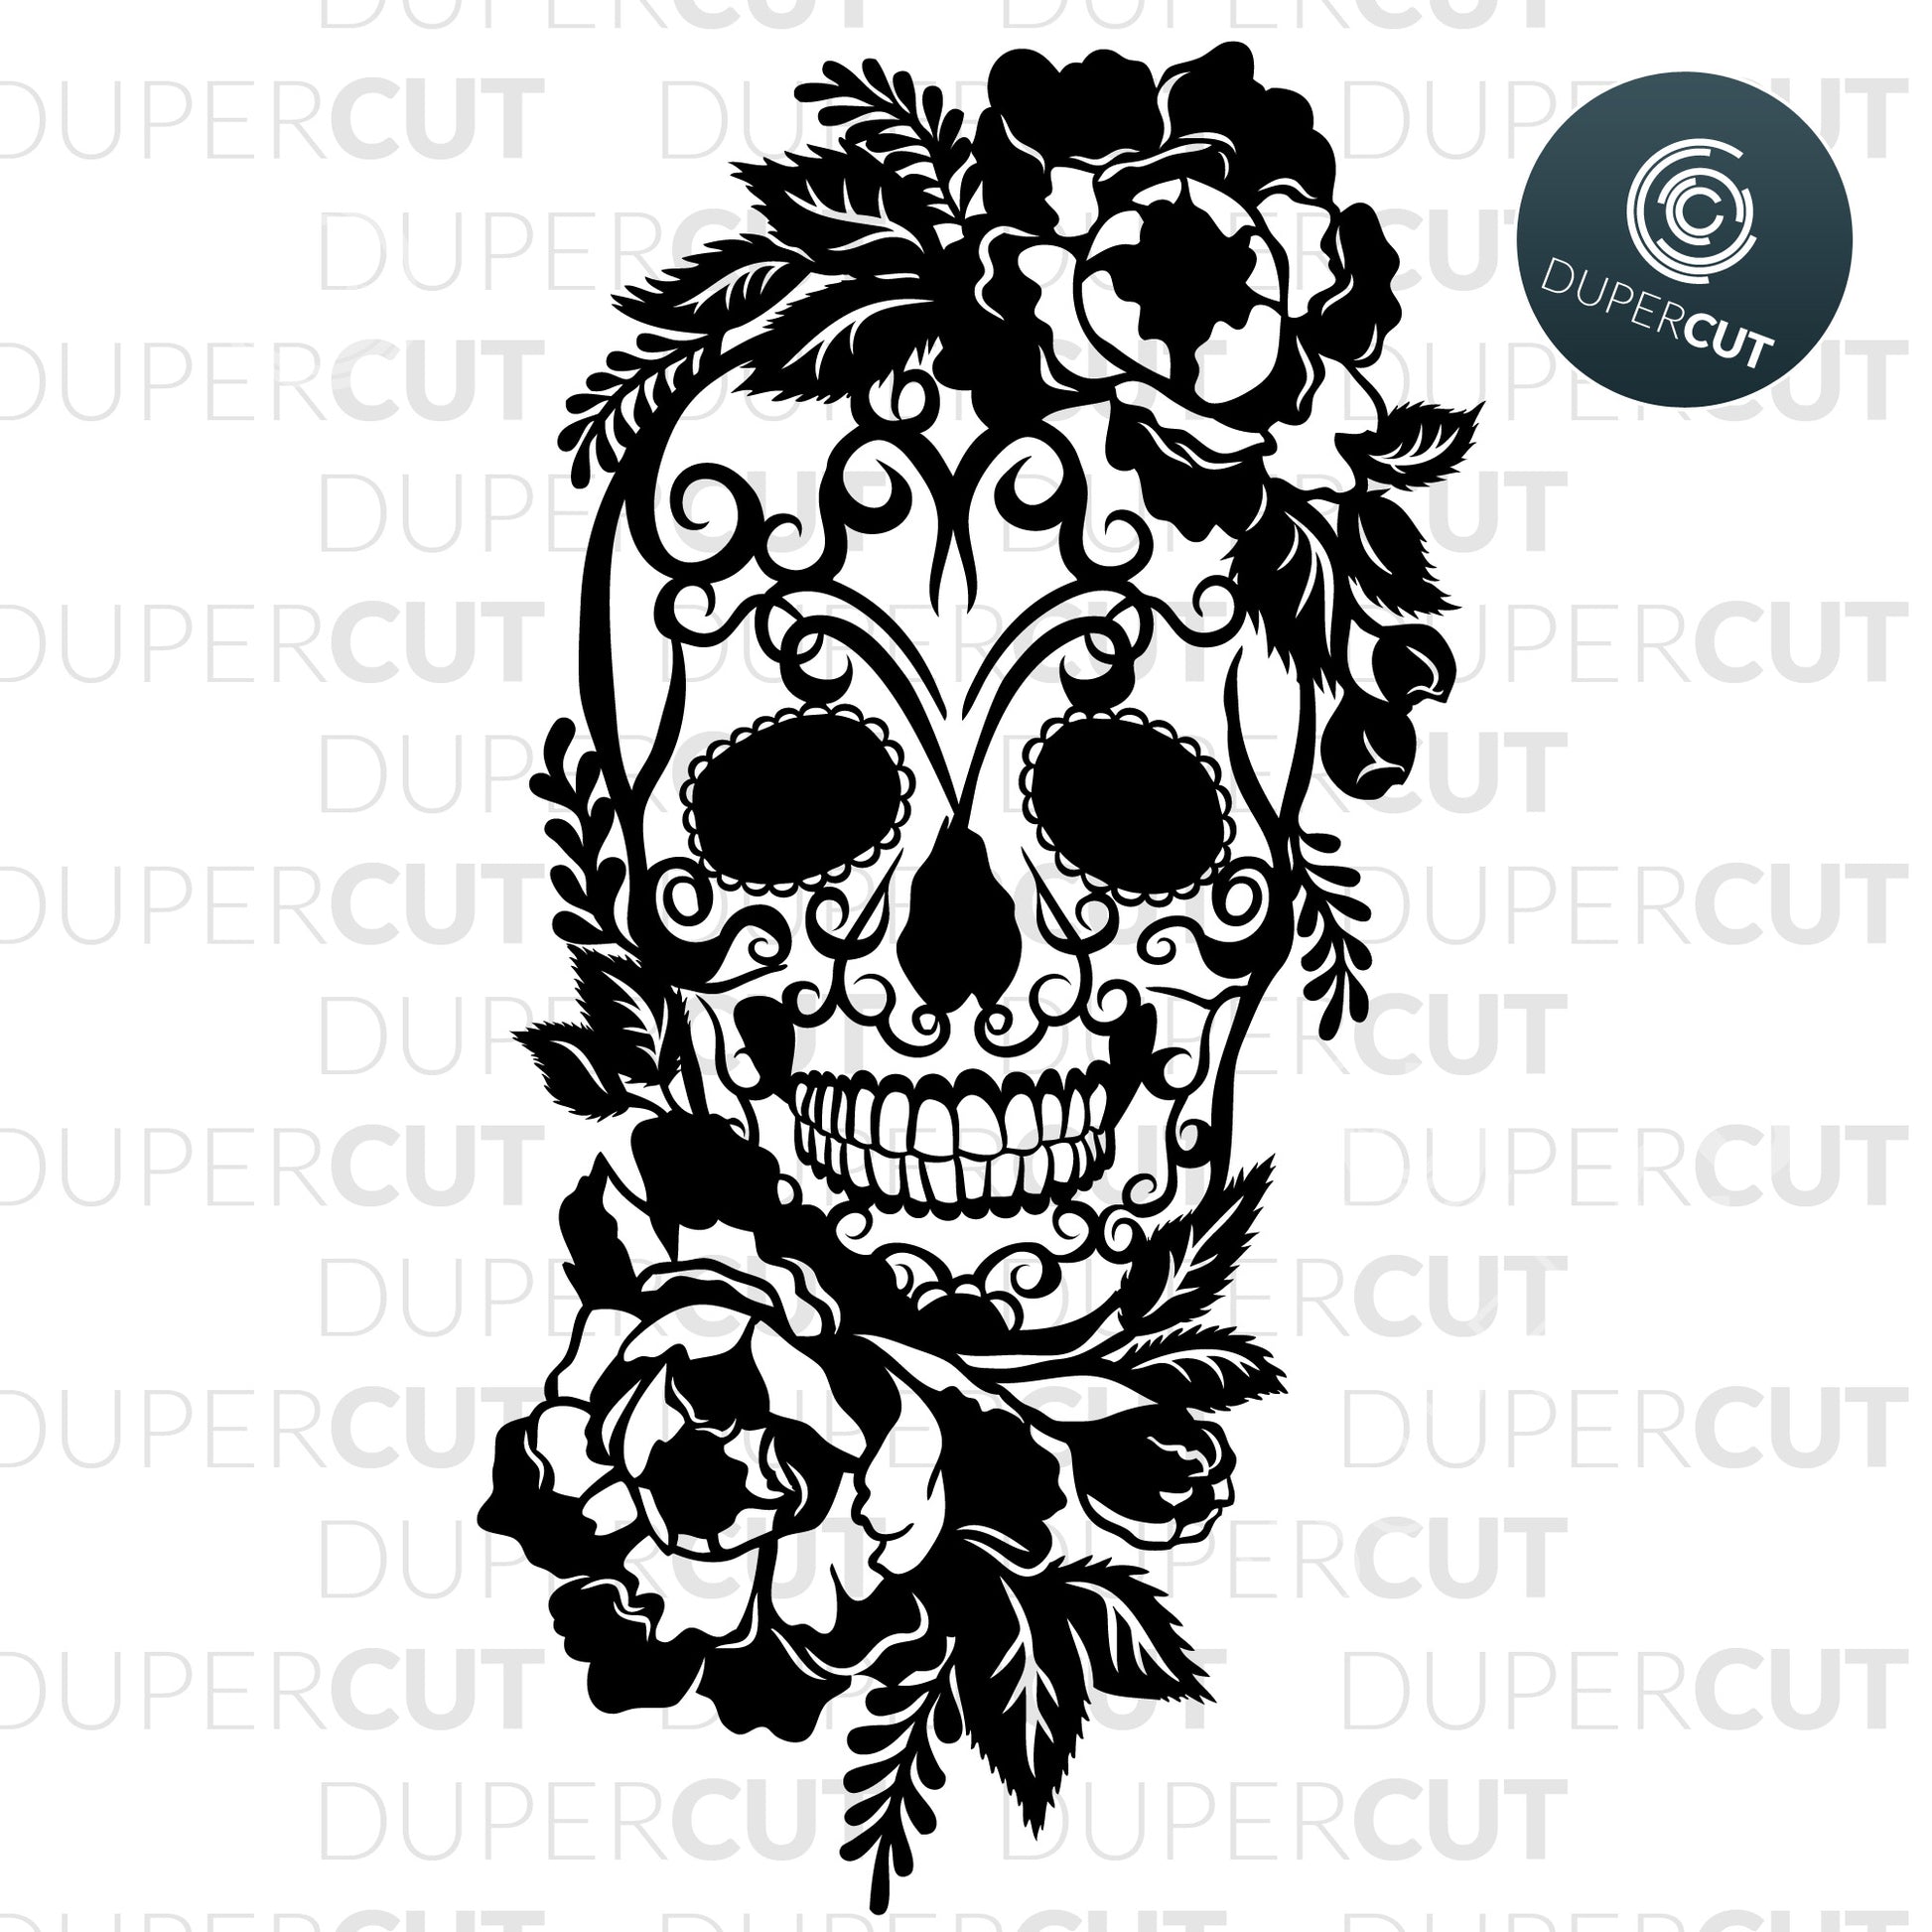 Mexican sugar skull calavera with flowers. SVG PNG DXF cutting files for Cricut, Silhouette, Glowforge, print on demand, sublimation templates